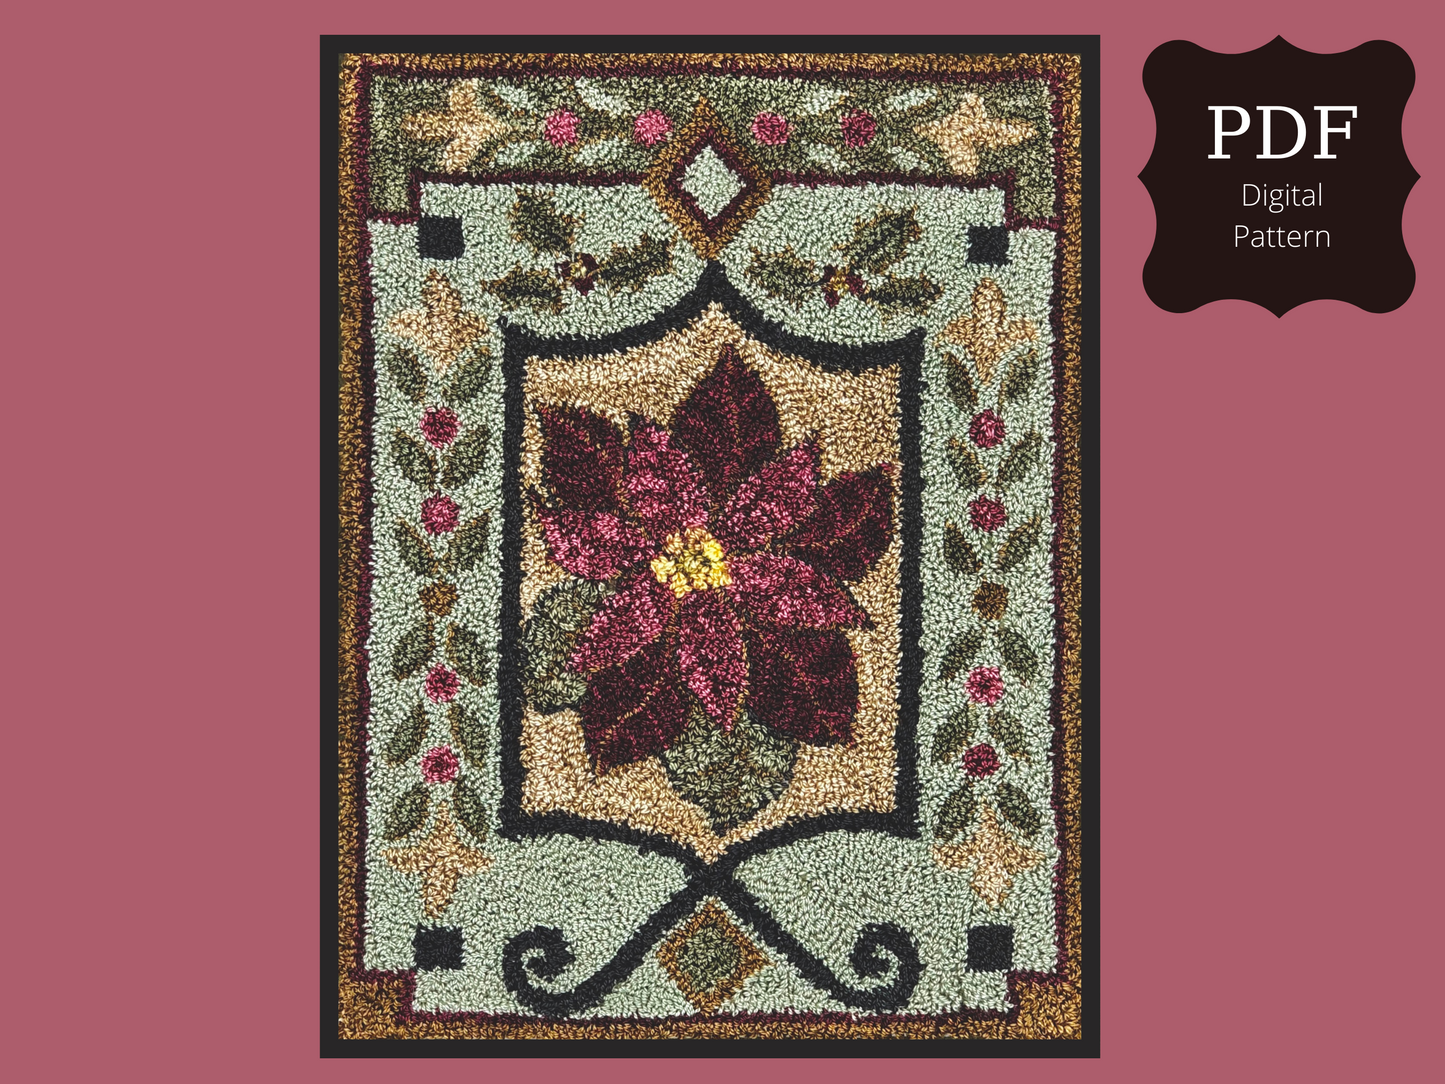 Holiday Views PDF Punch Needle Digital Download Pattern by Orphaned Wool. This is the perfect poinsettia holiday pattern. Finished using Valdani Threads but can also be completed using DMC Floss.